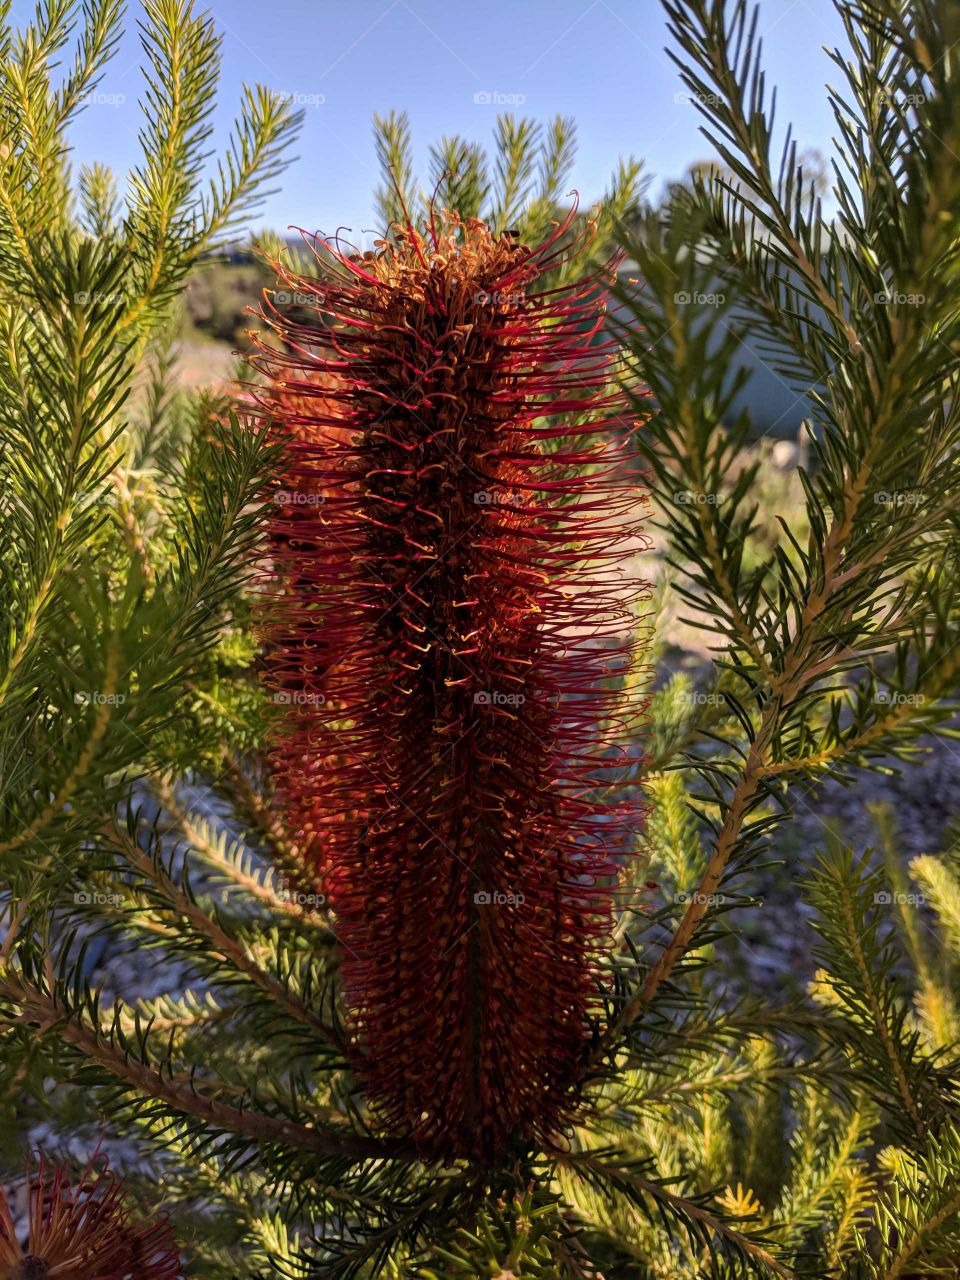 Vibrant and colourful flower of a Banksia